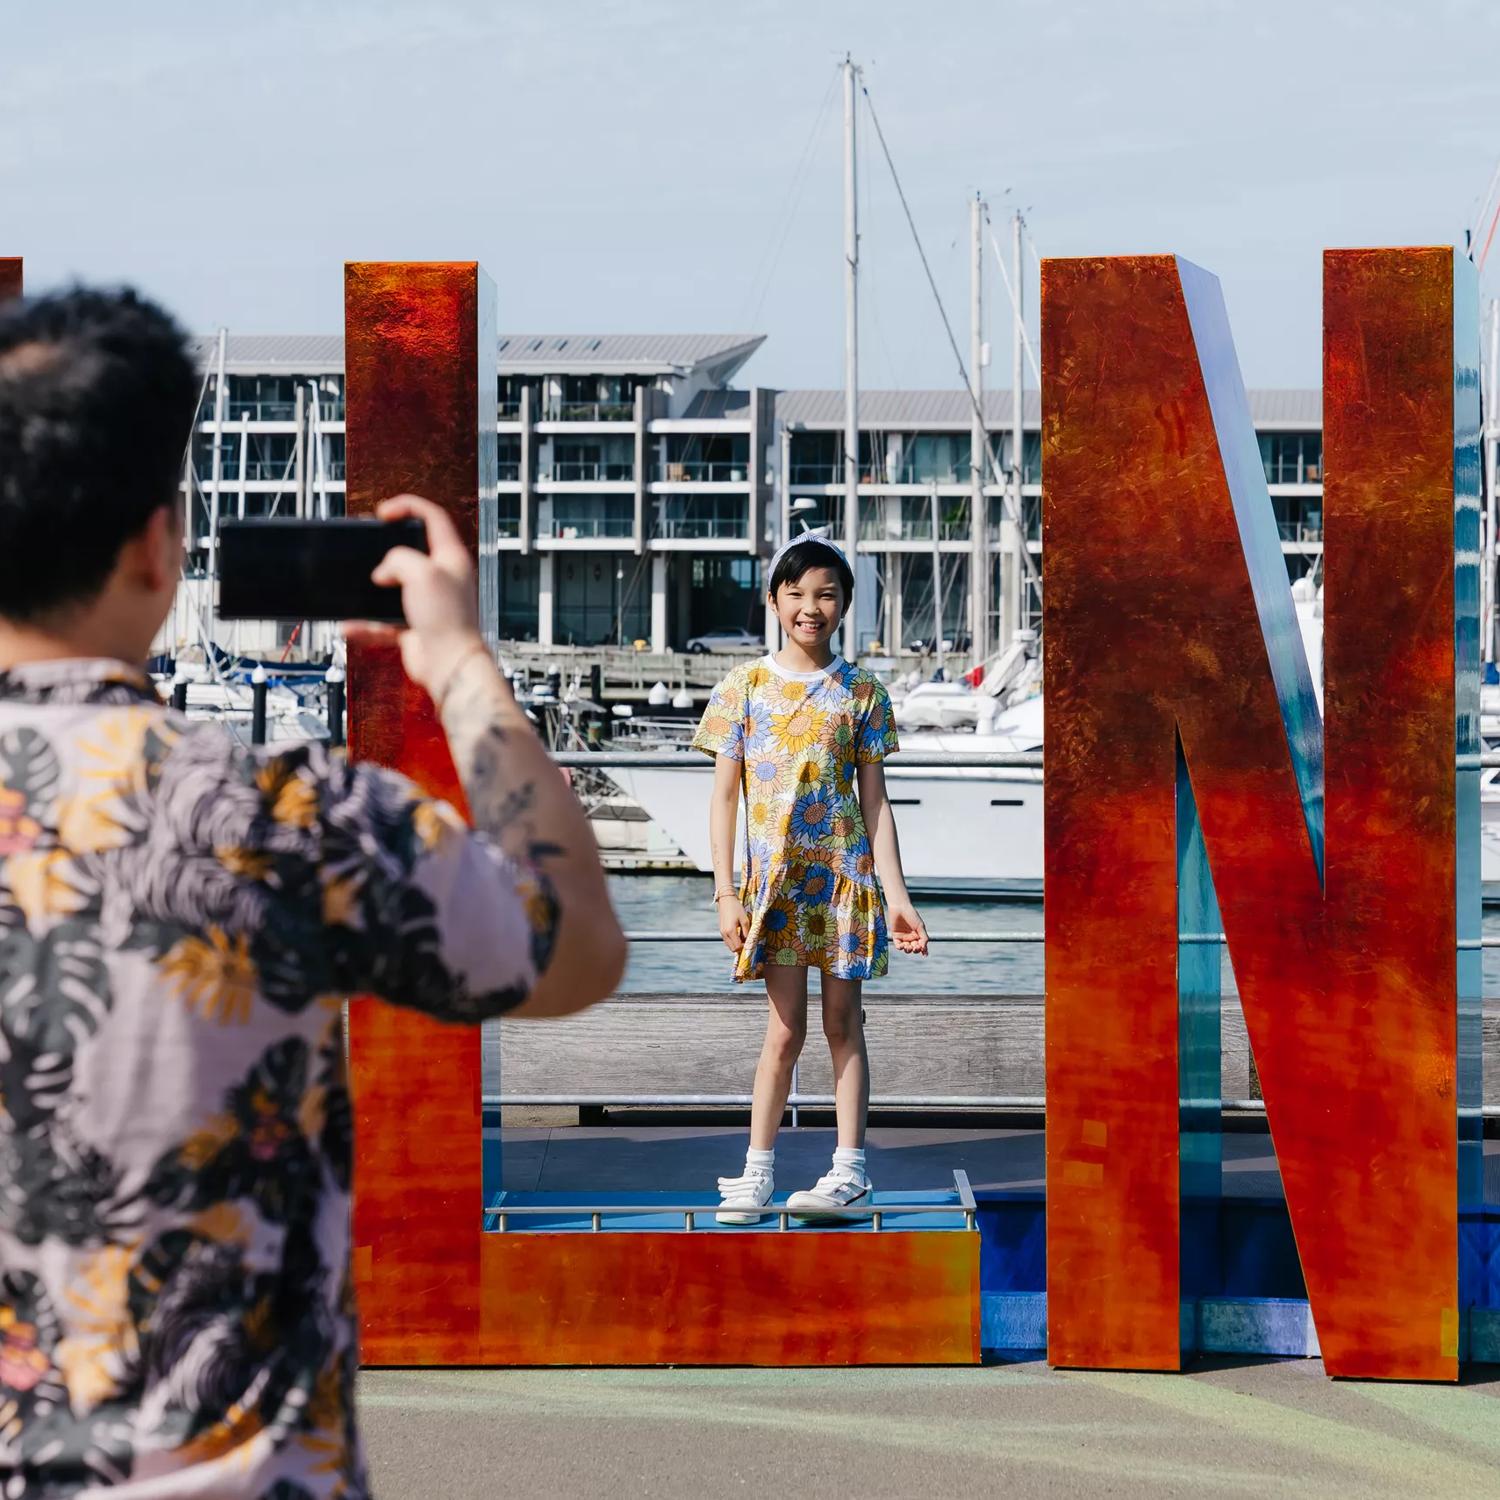 A parent taking of a photo of their child posing in the Well_ngton sign on the waterfront.